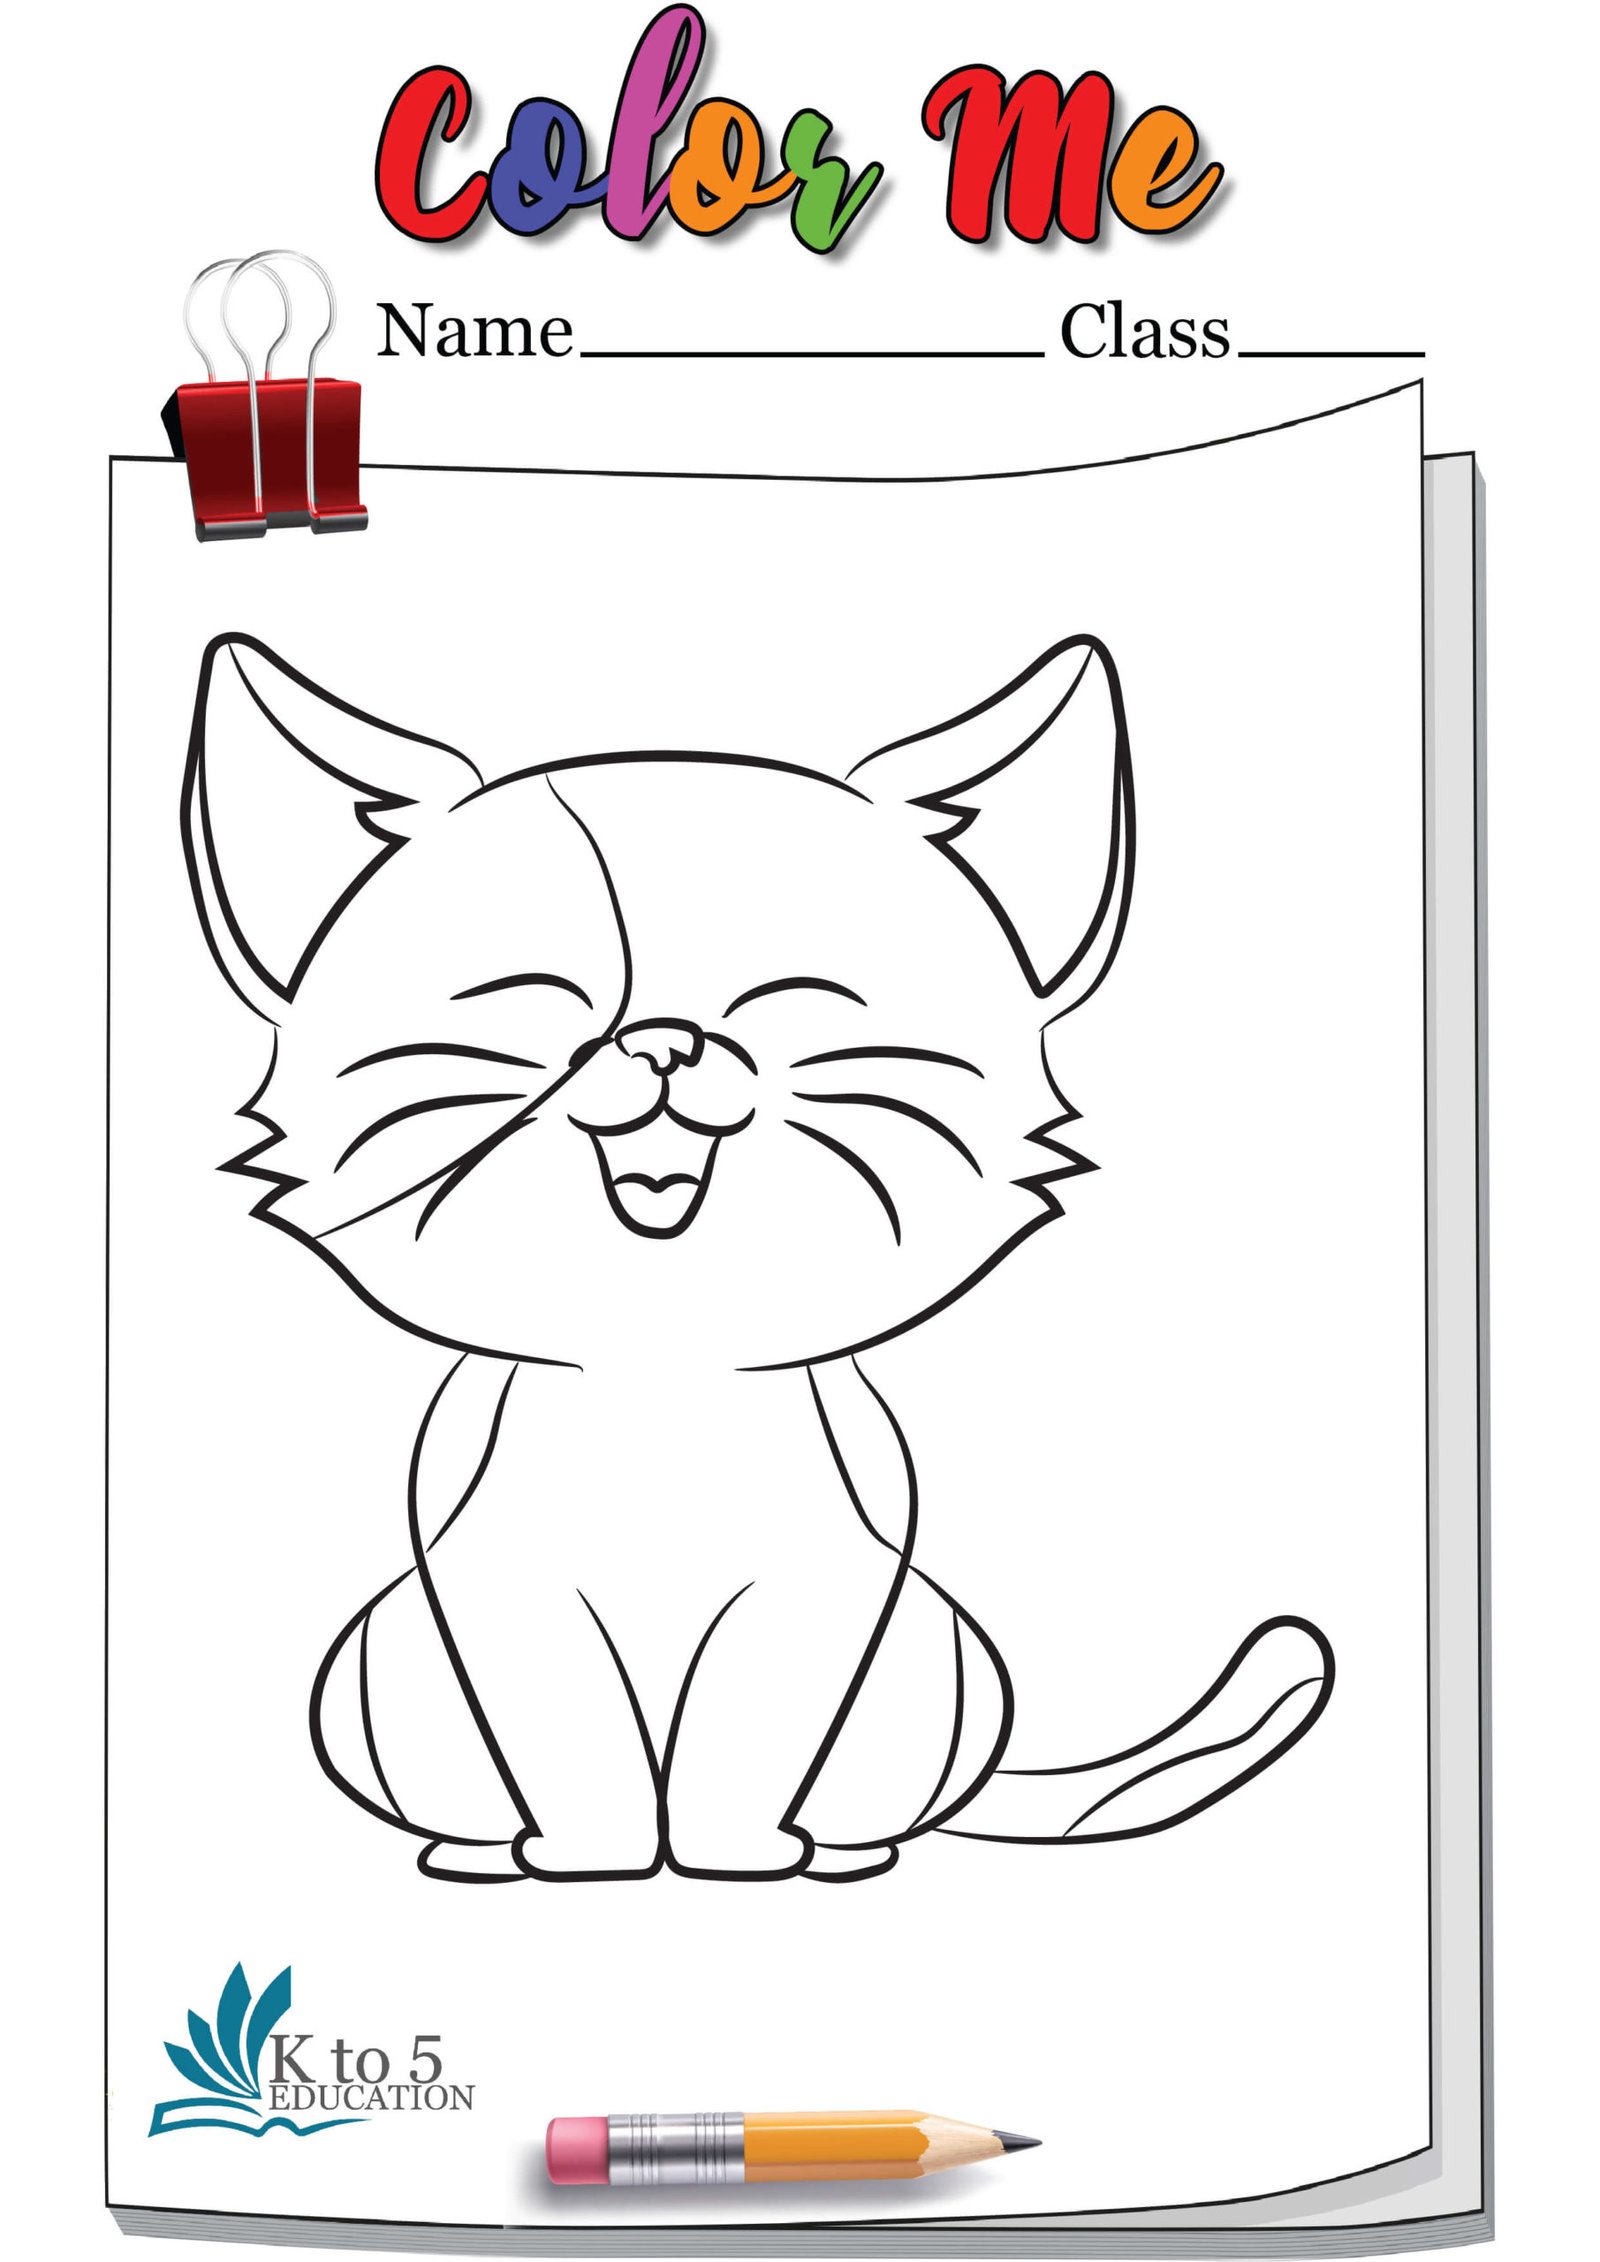 Cat Happy and Smiling coloring page worksheet